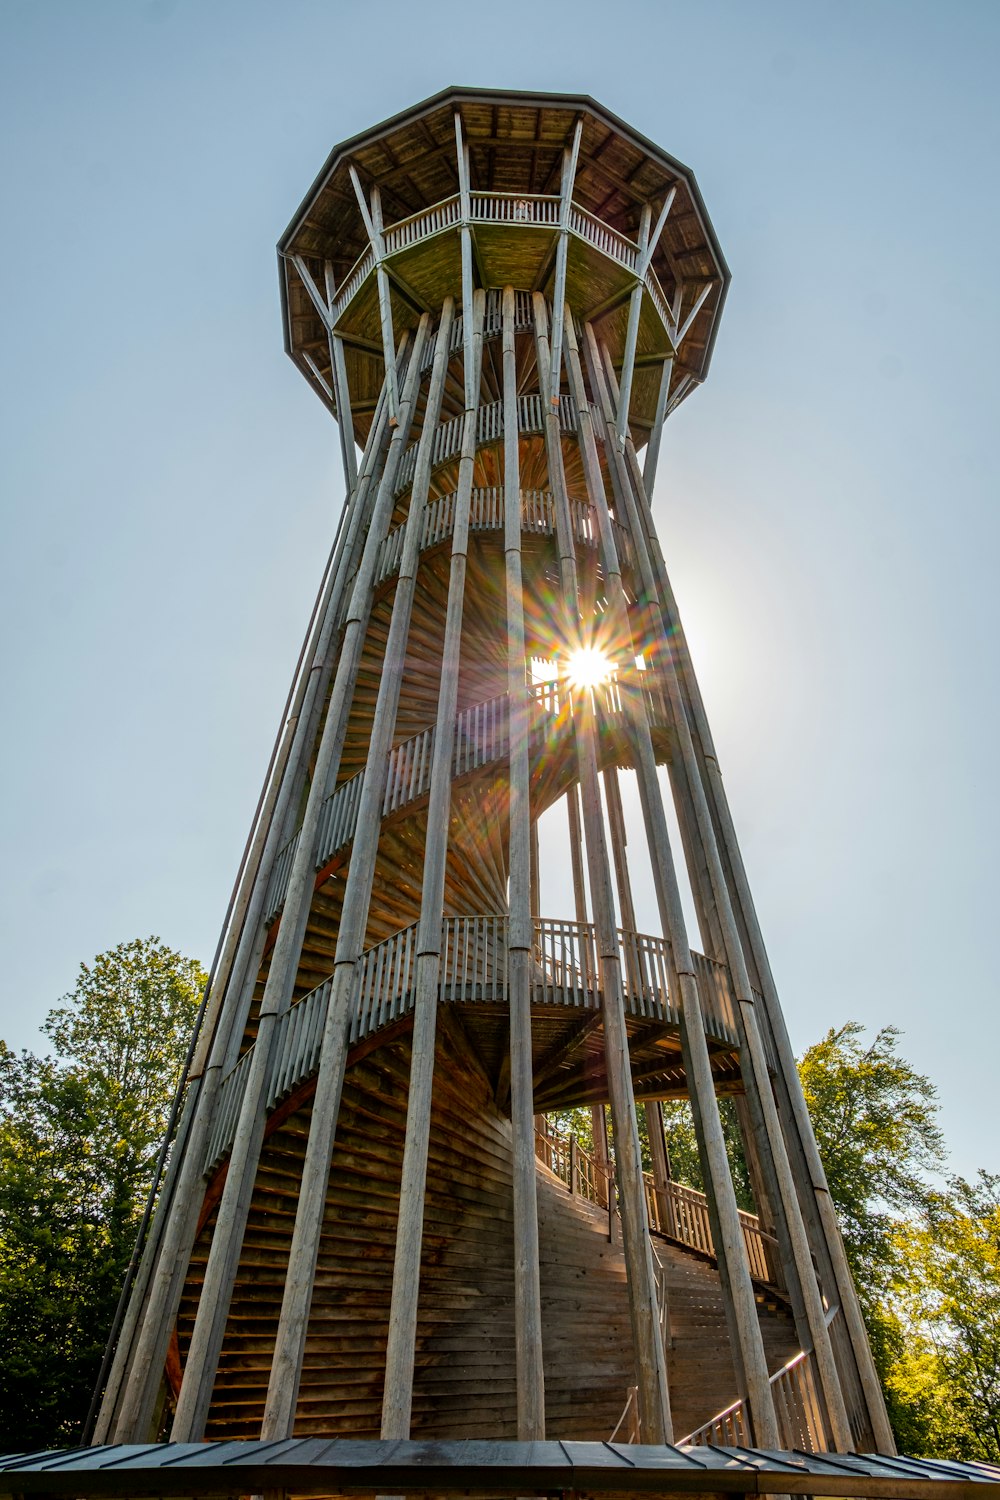 a tall wooden tower with a spiral staircase